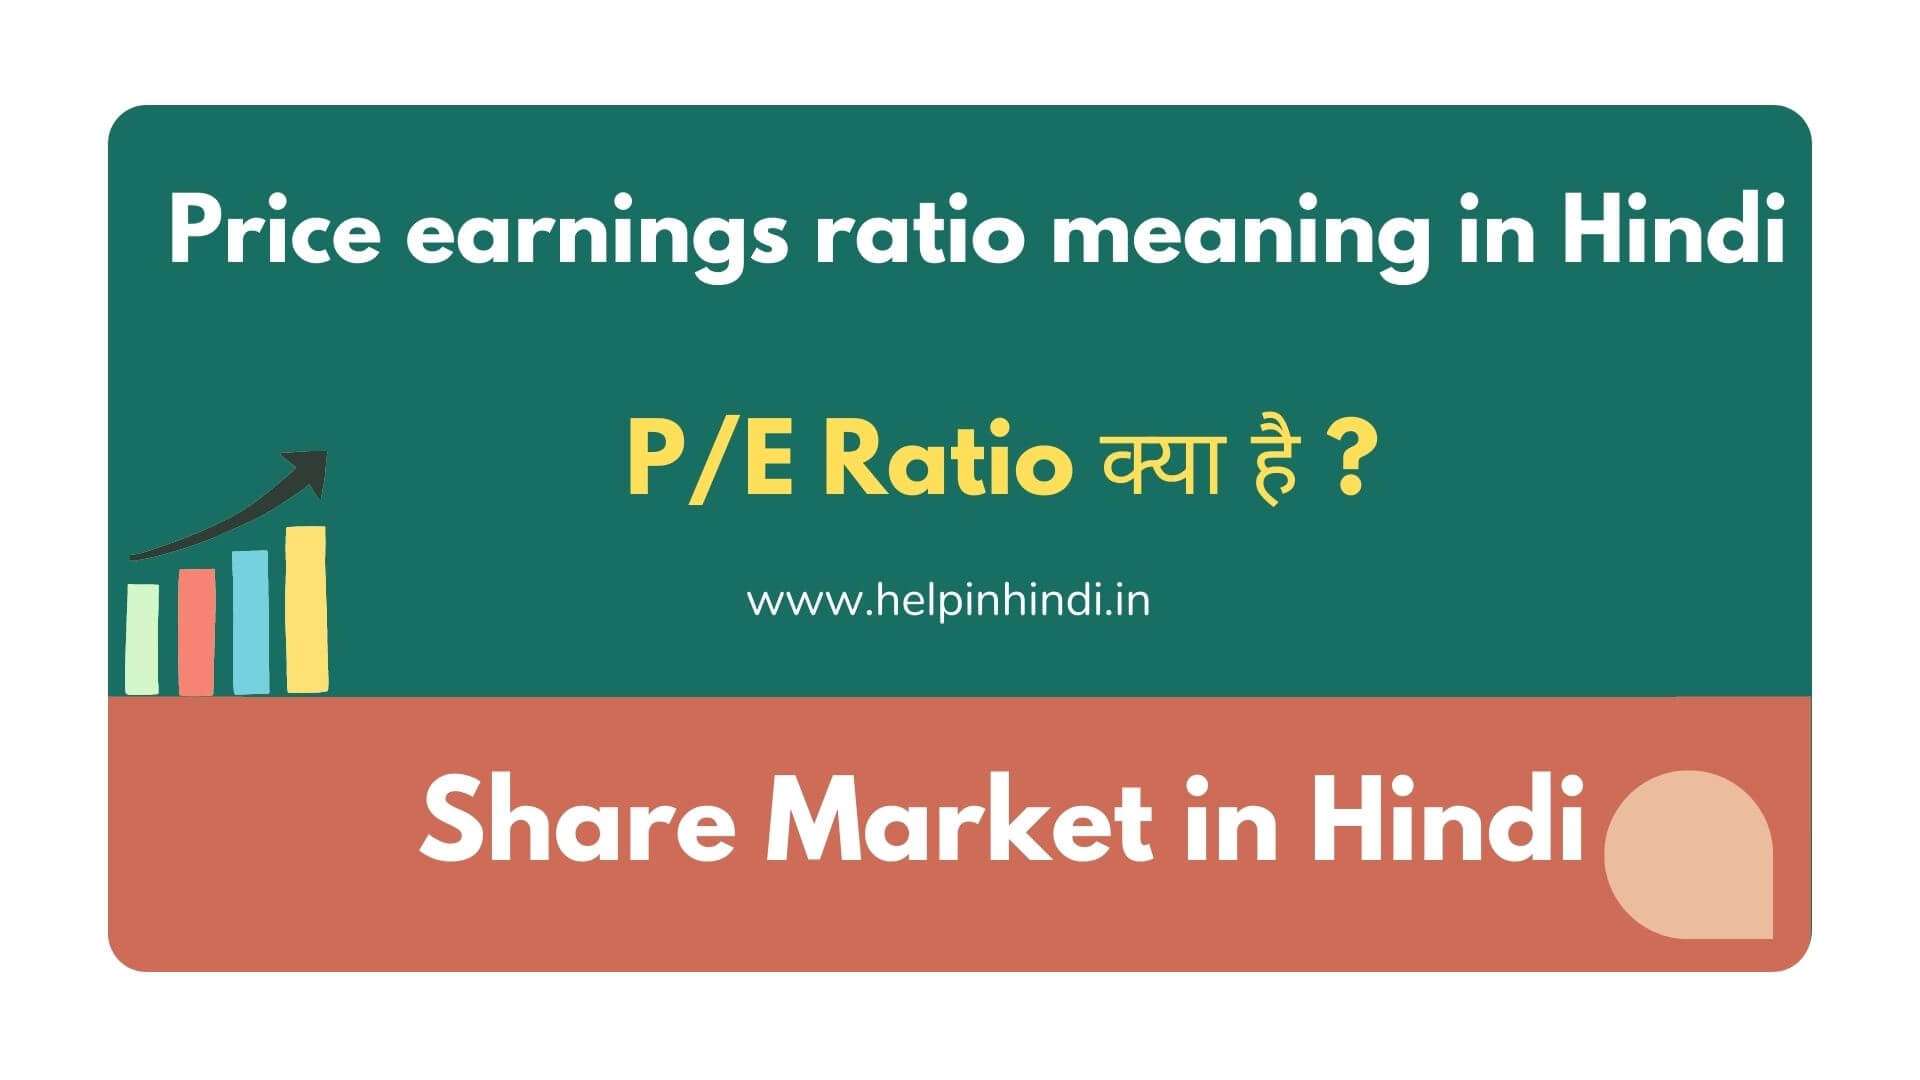 Price earnings ratio meaning in Hindi